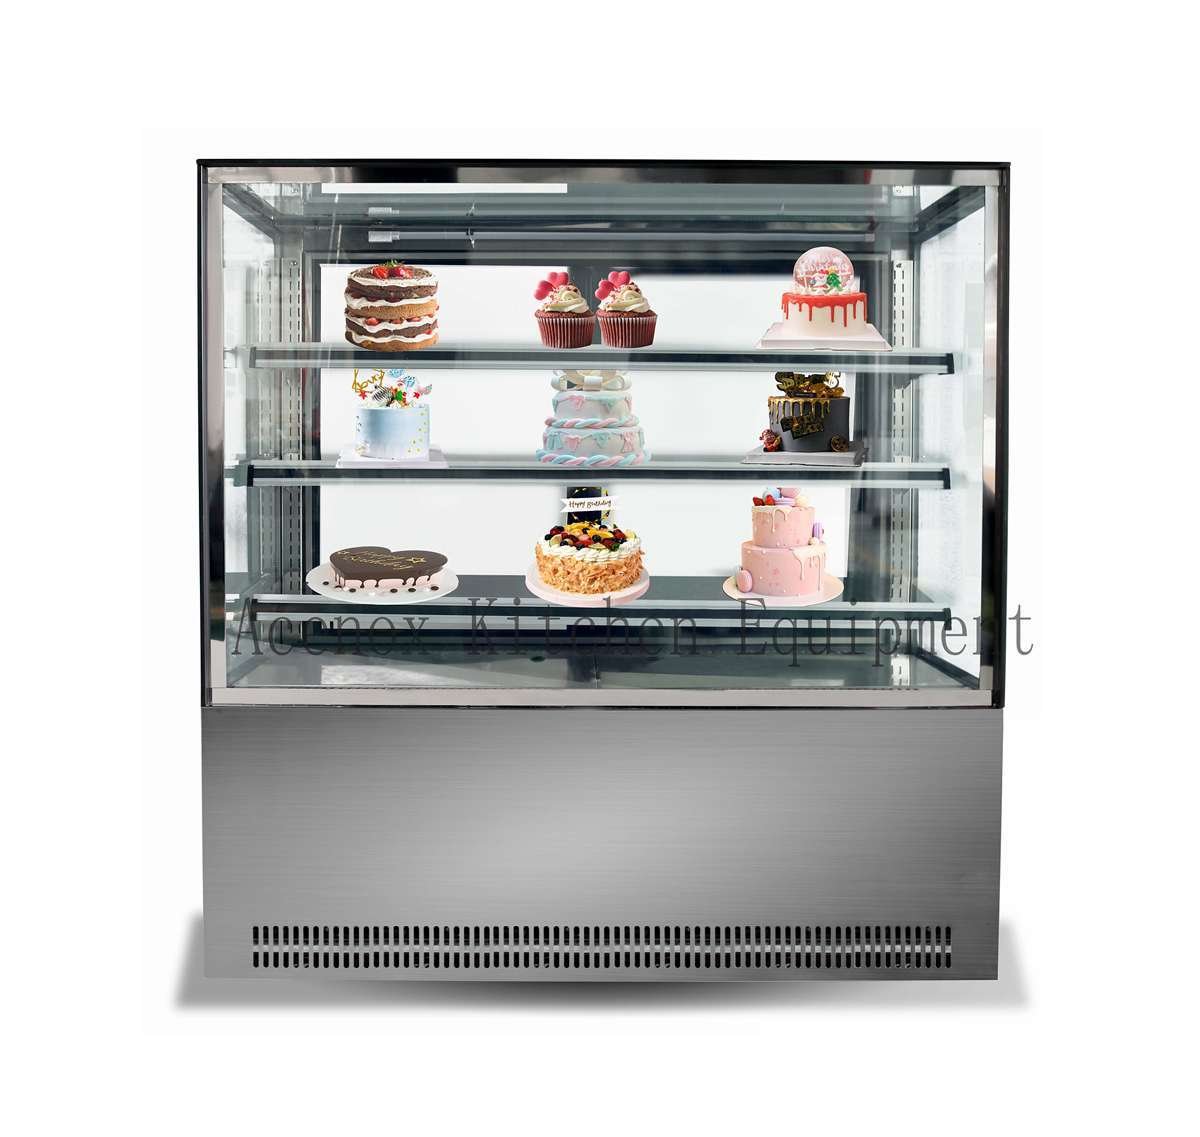 CAKE DISPLAY COUNTER Suppliers In Lucknow - Mahagujarat Refrigeration